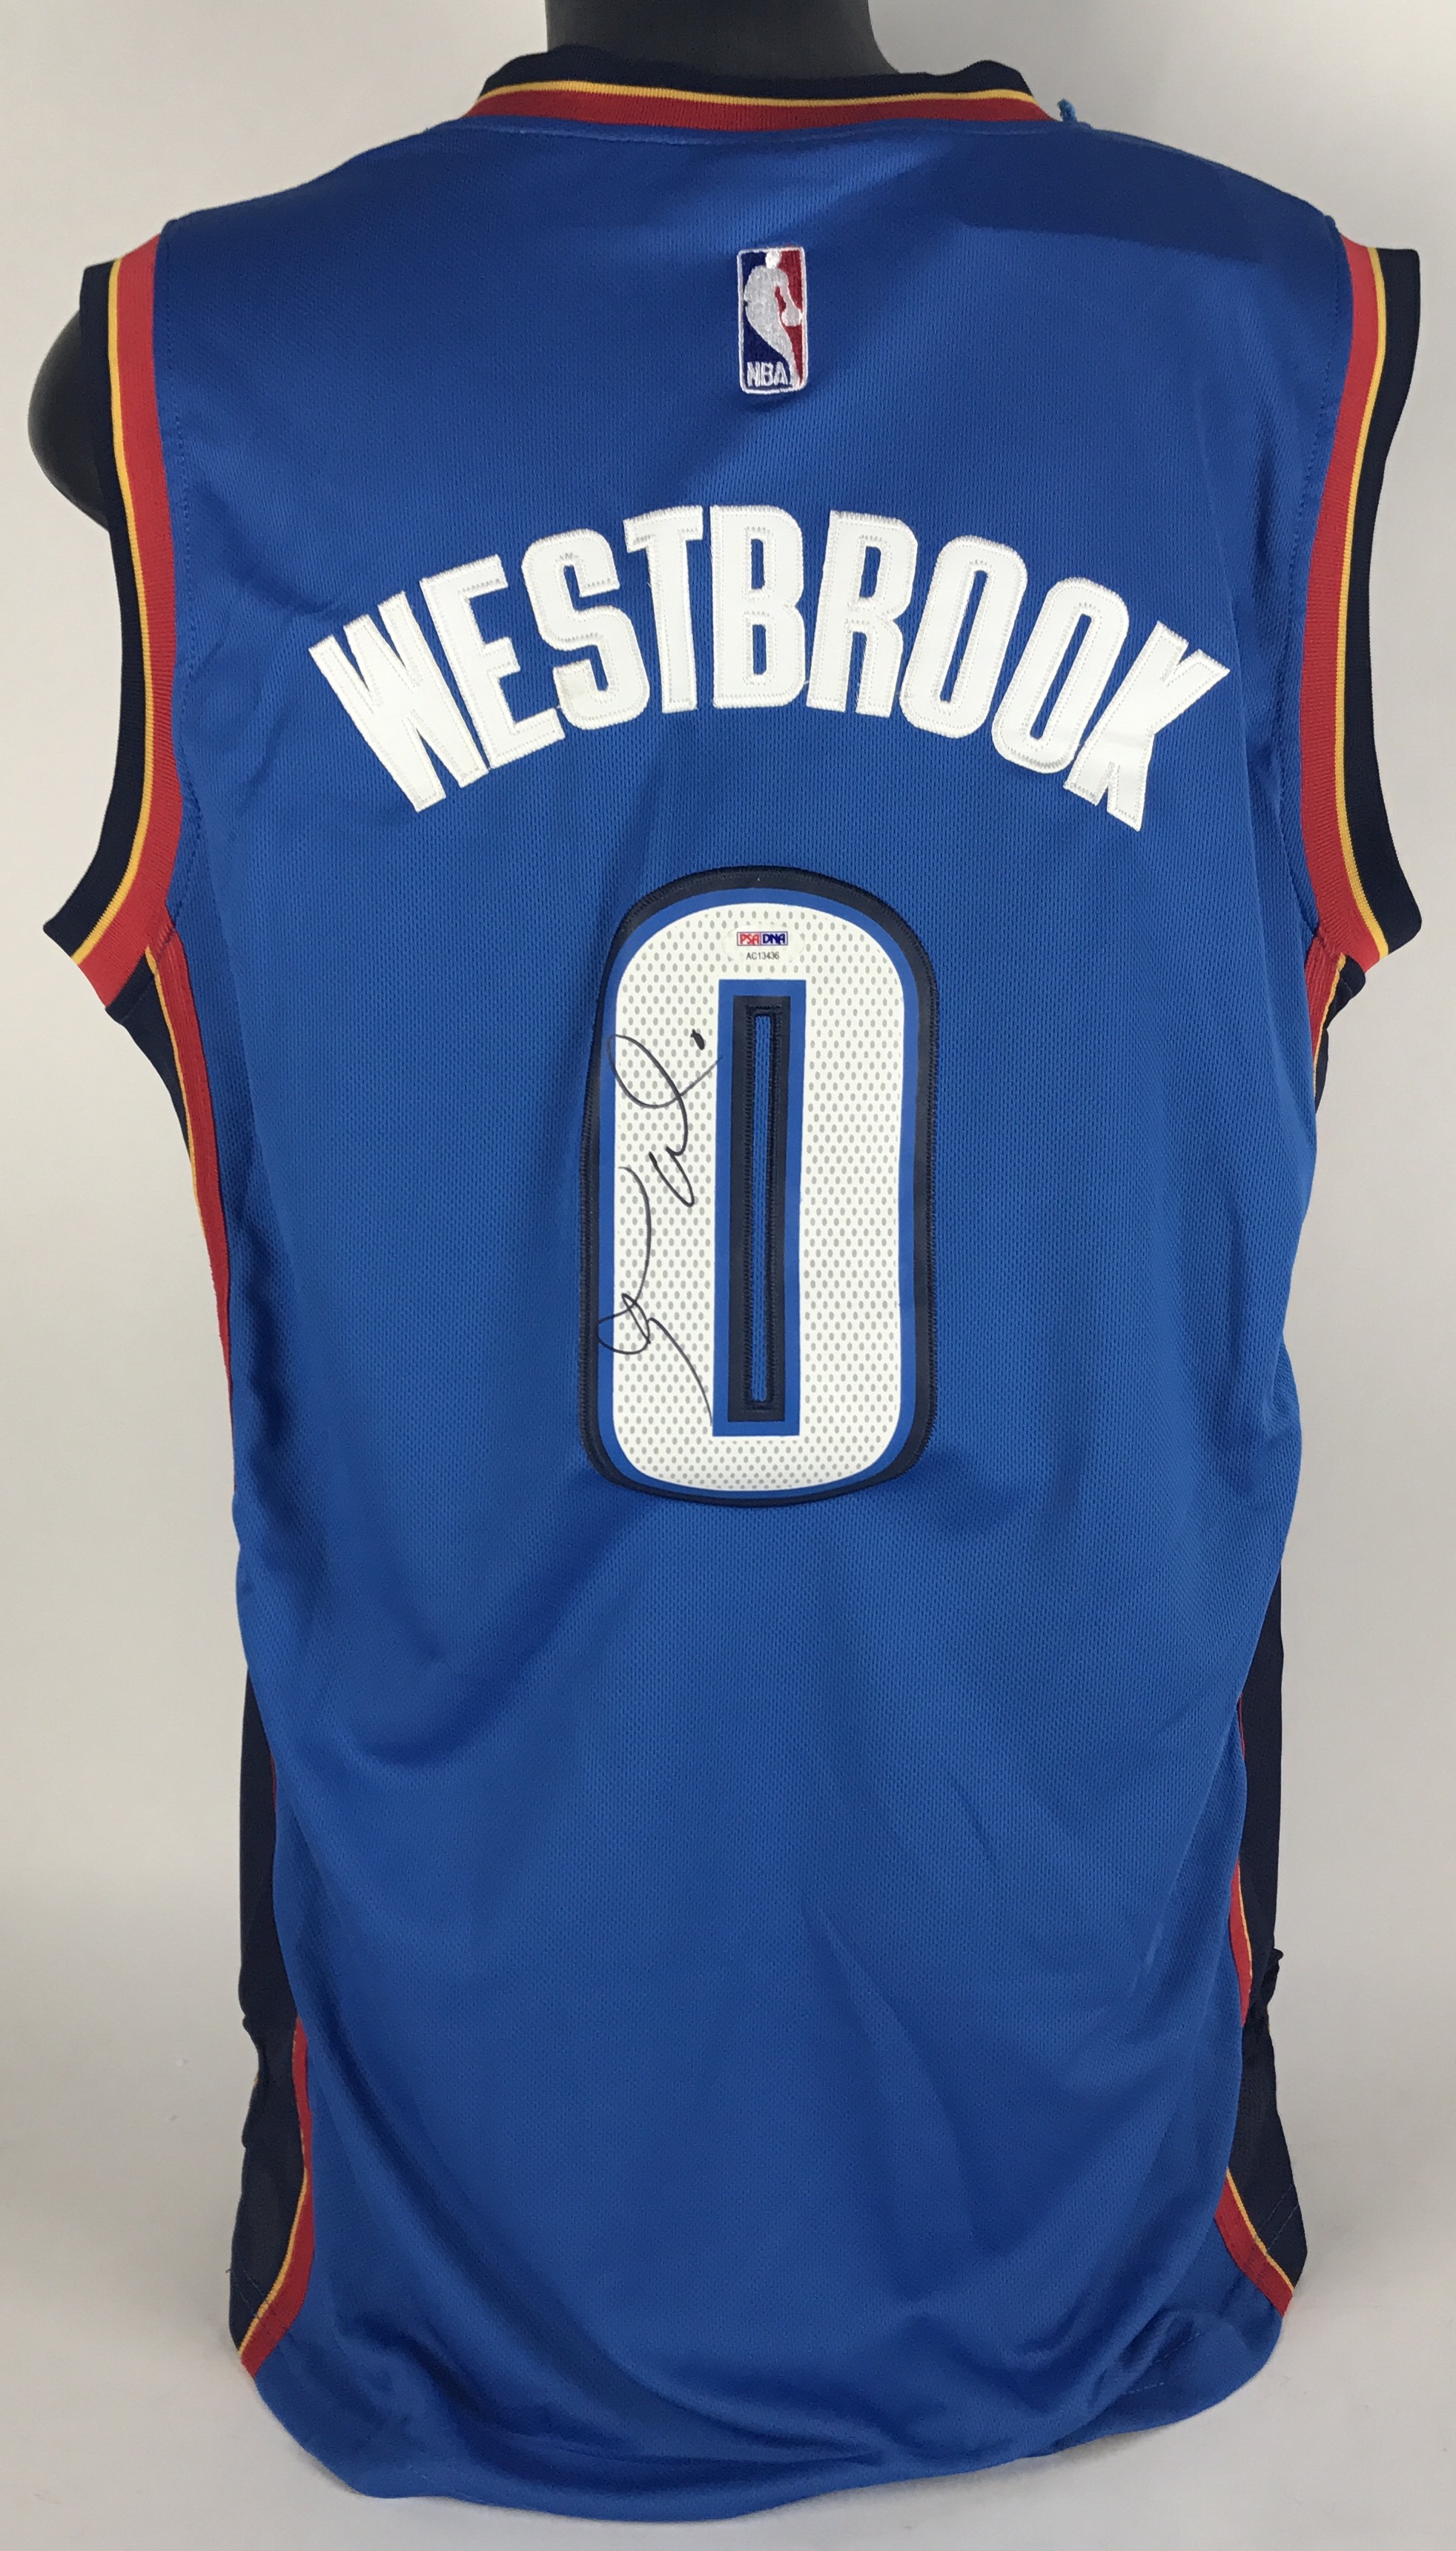 autograph russell westbrook signature